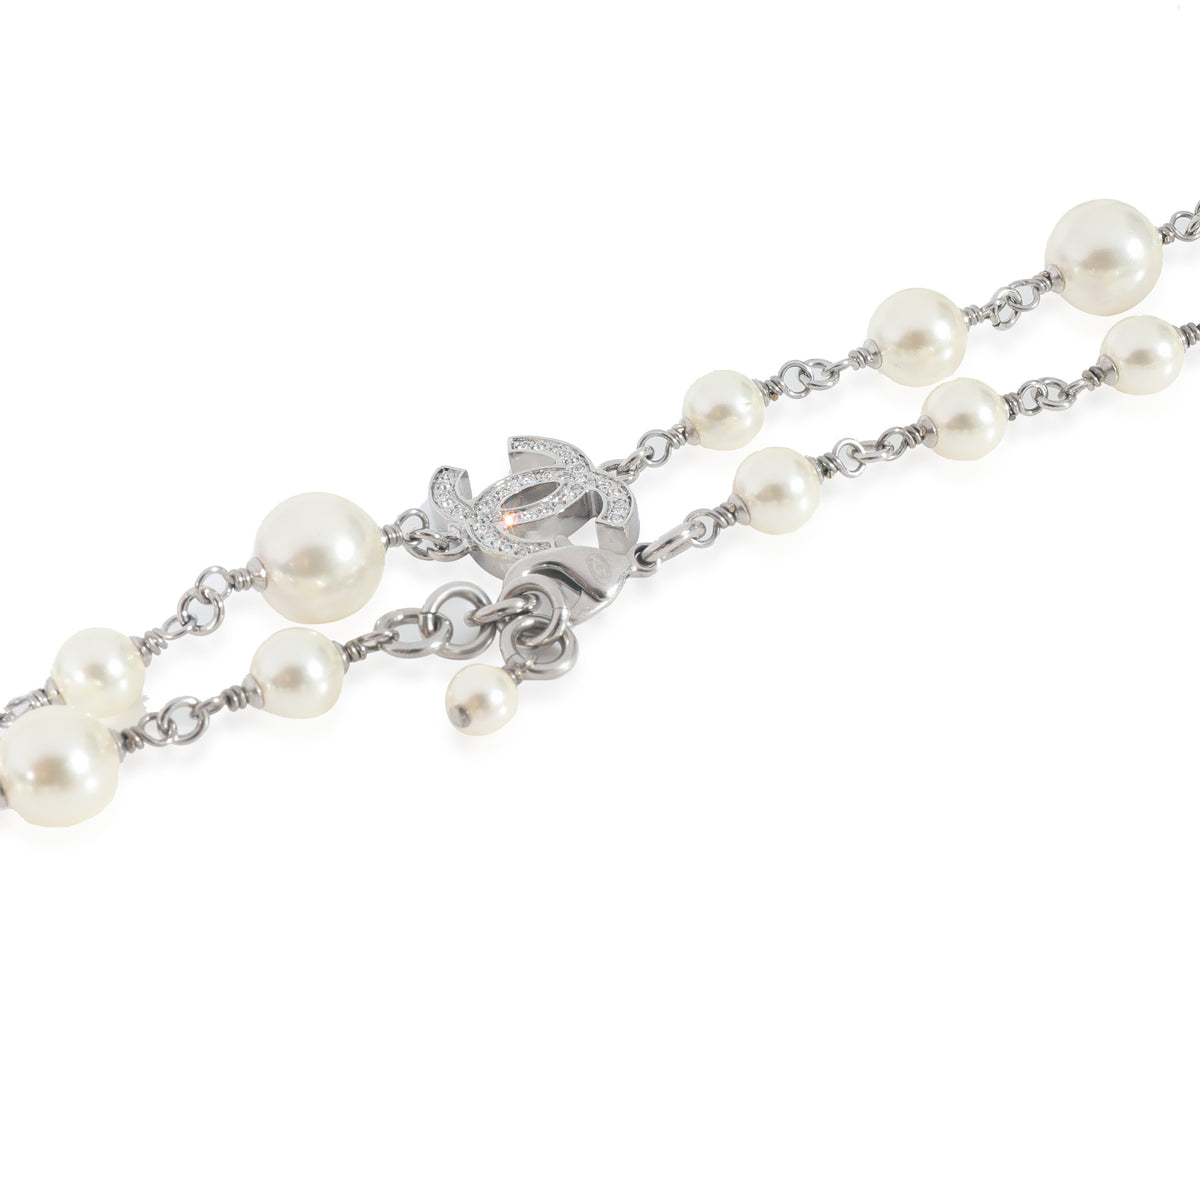 Chanel 2020 CC Necklace With Faux Pearls & Strass, myGemma